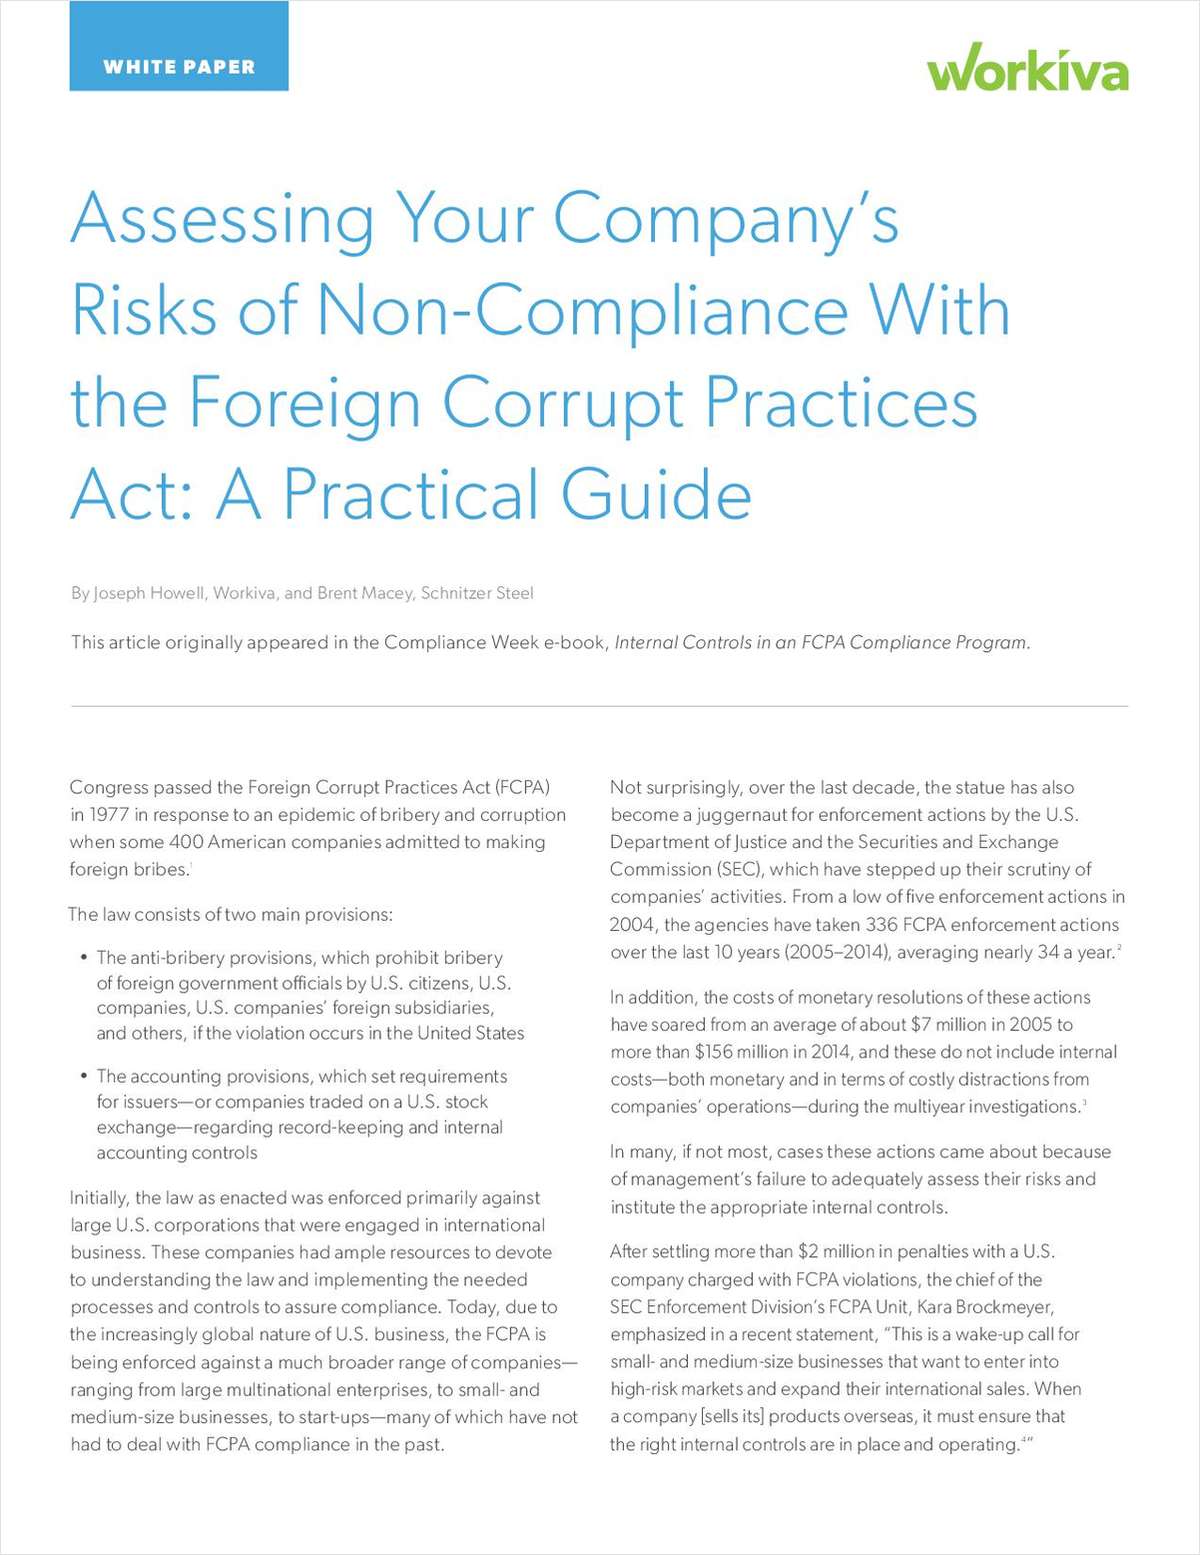 Assessing Your Company's Risks of Non-Compliance with the FCPA